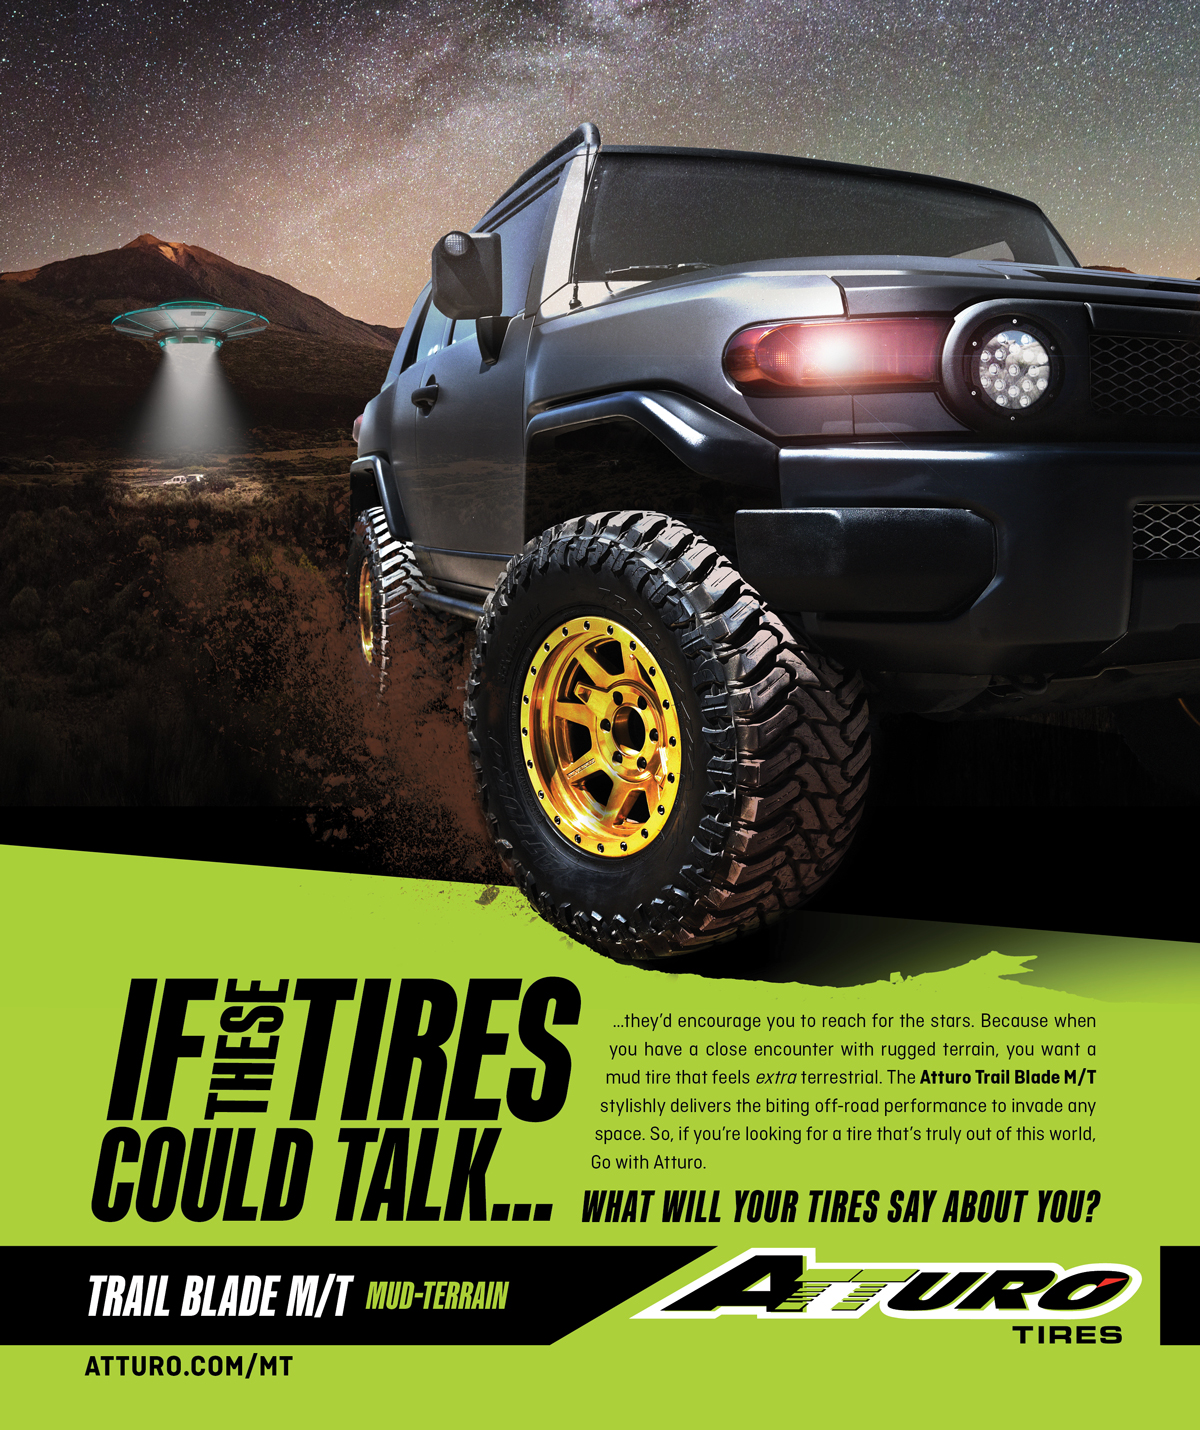 Atturo Tires - Print Ad - If These Tires Could Talk - Trail Blade M/T